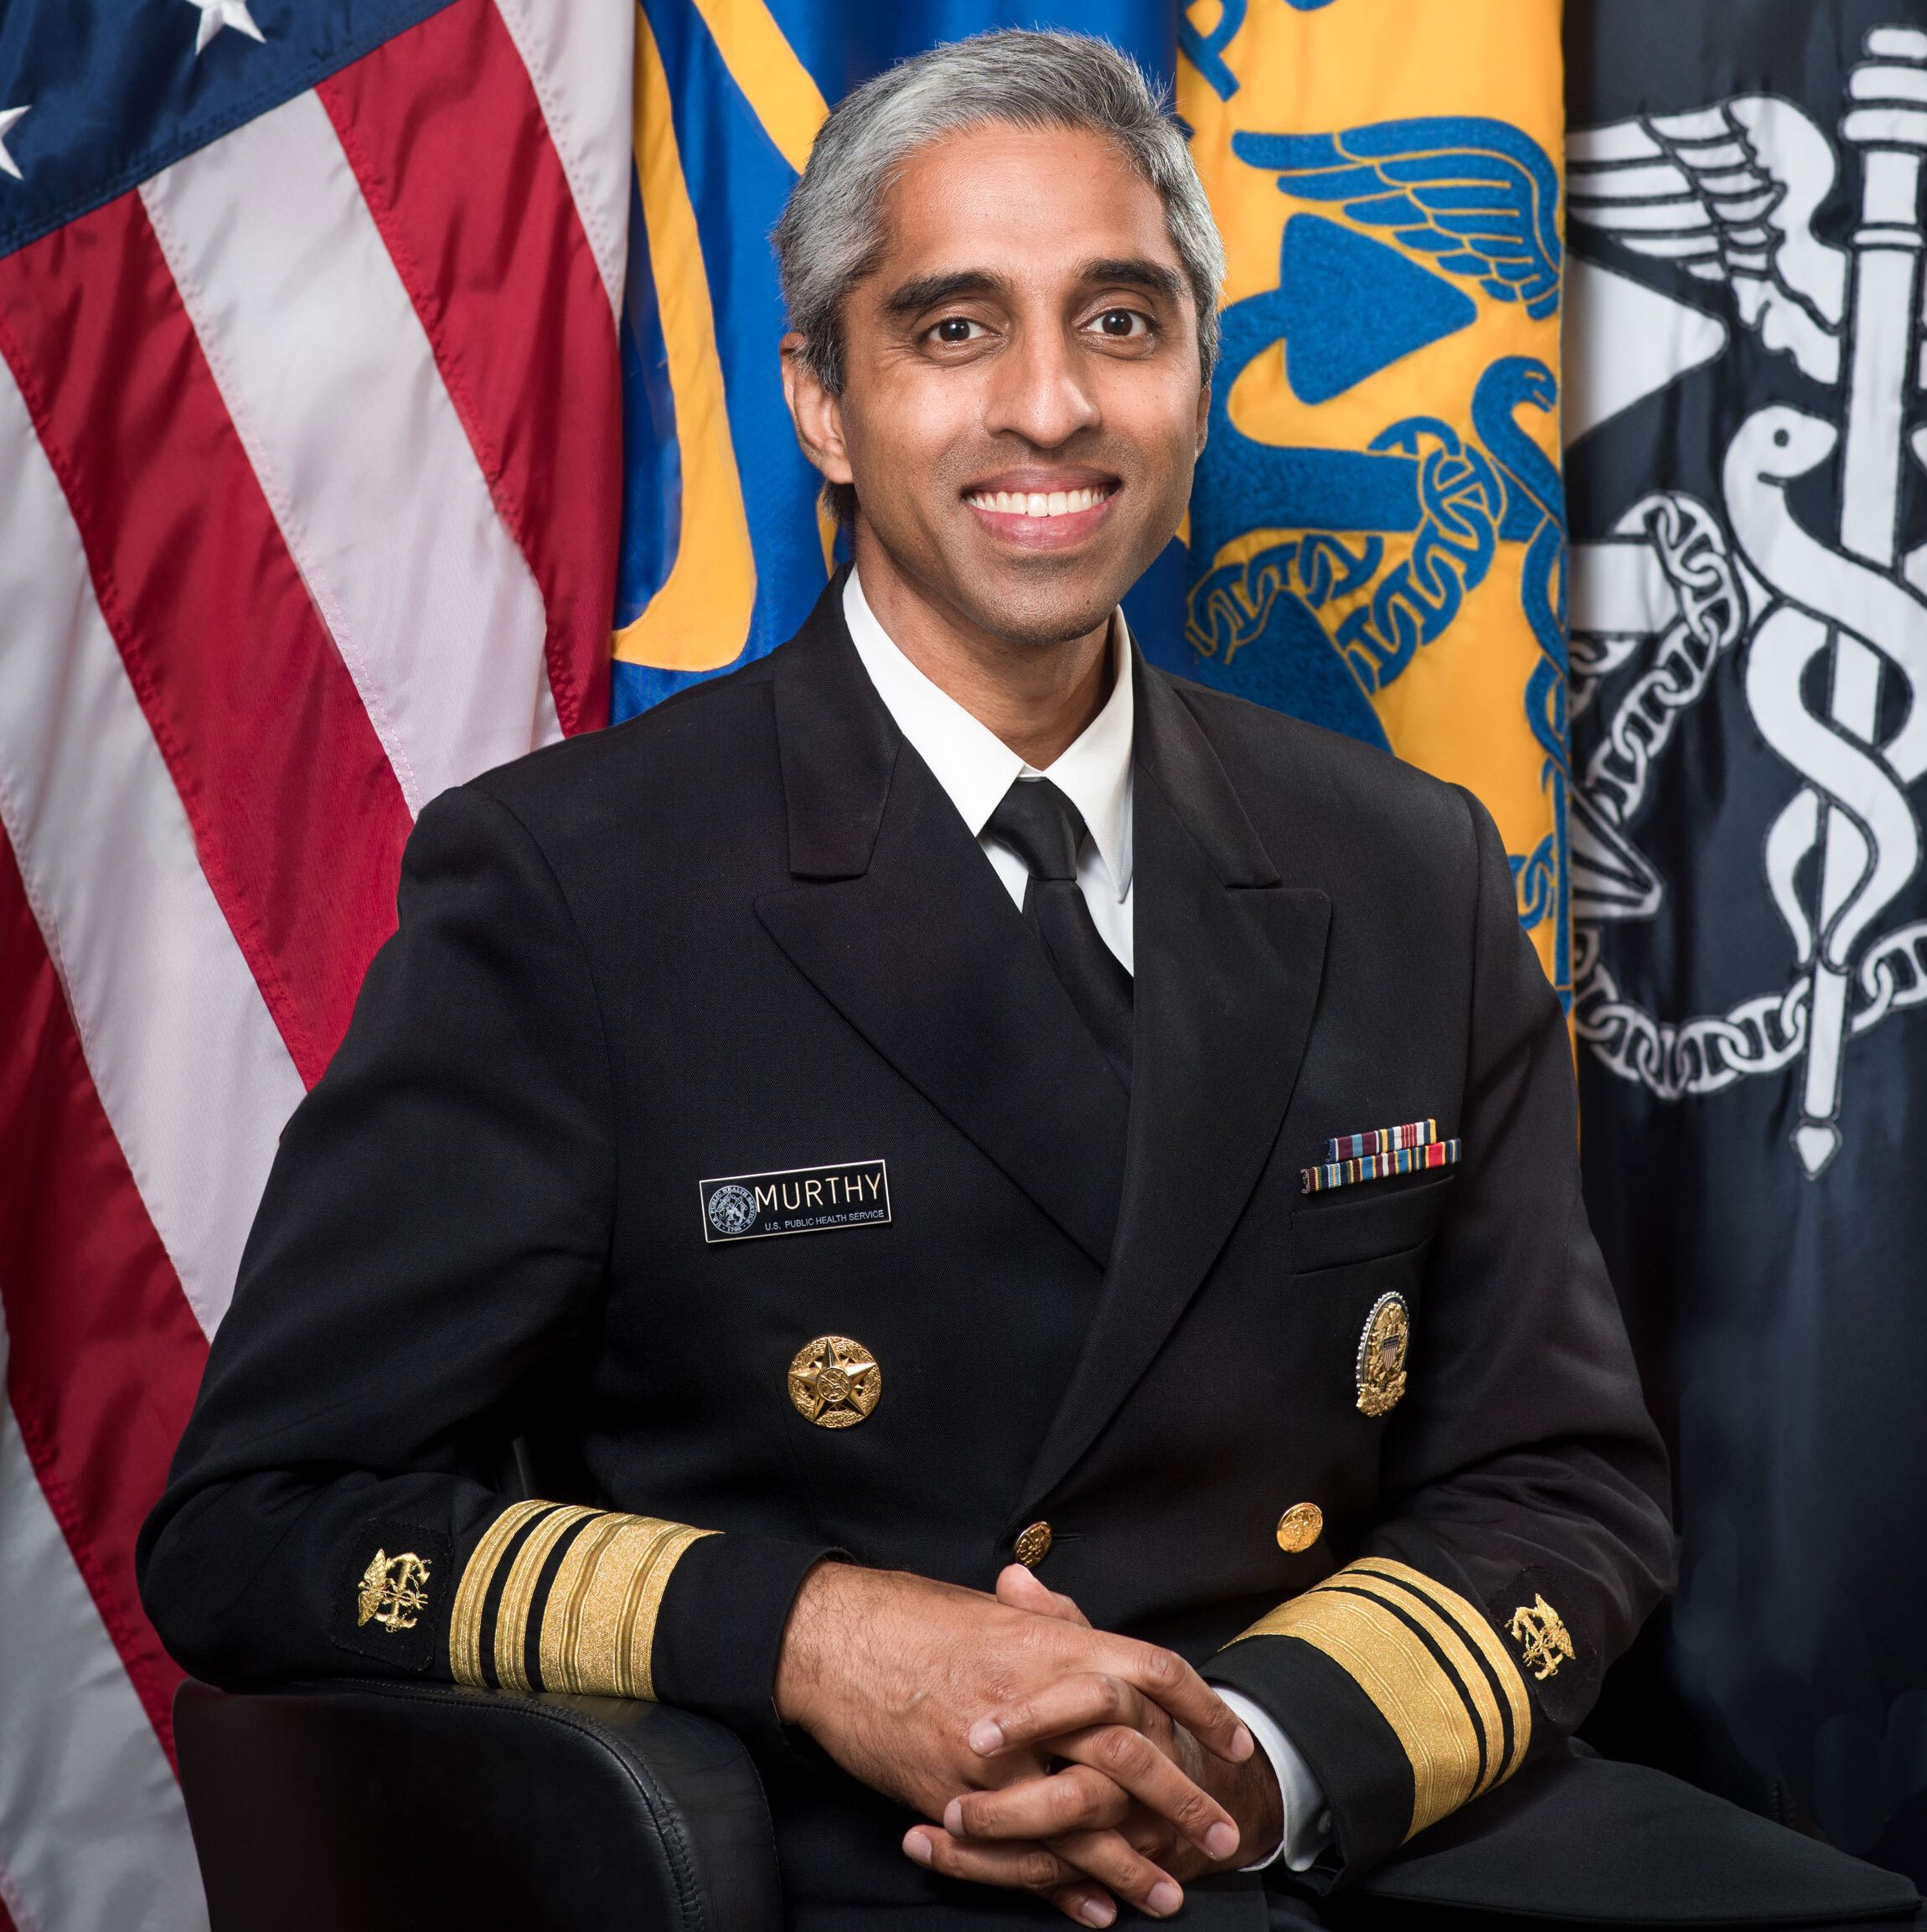 A Day in the Life of Surgeon General Vivek Murthy